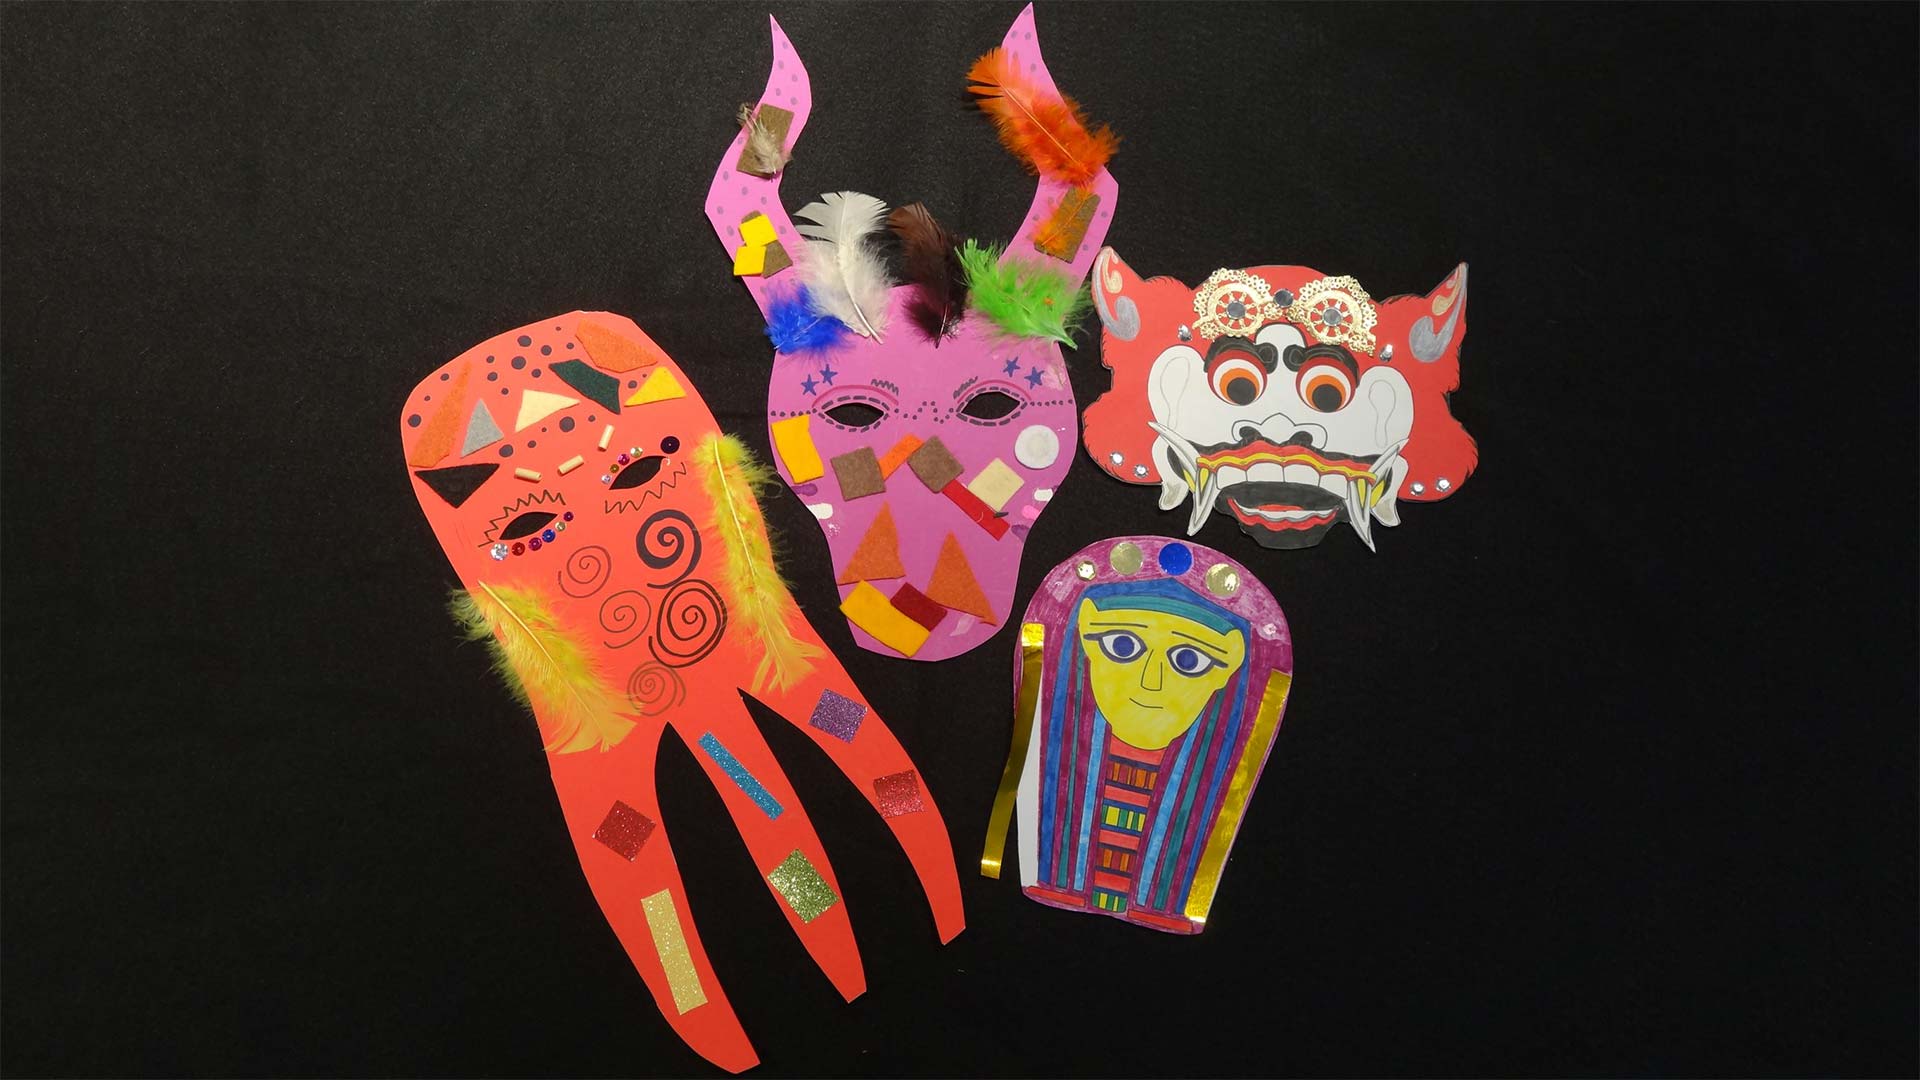 Multicolored paper masks from around the work with embellishments